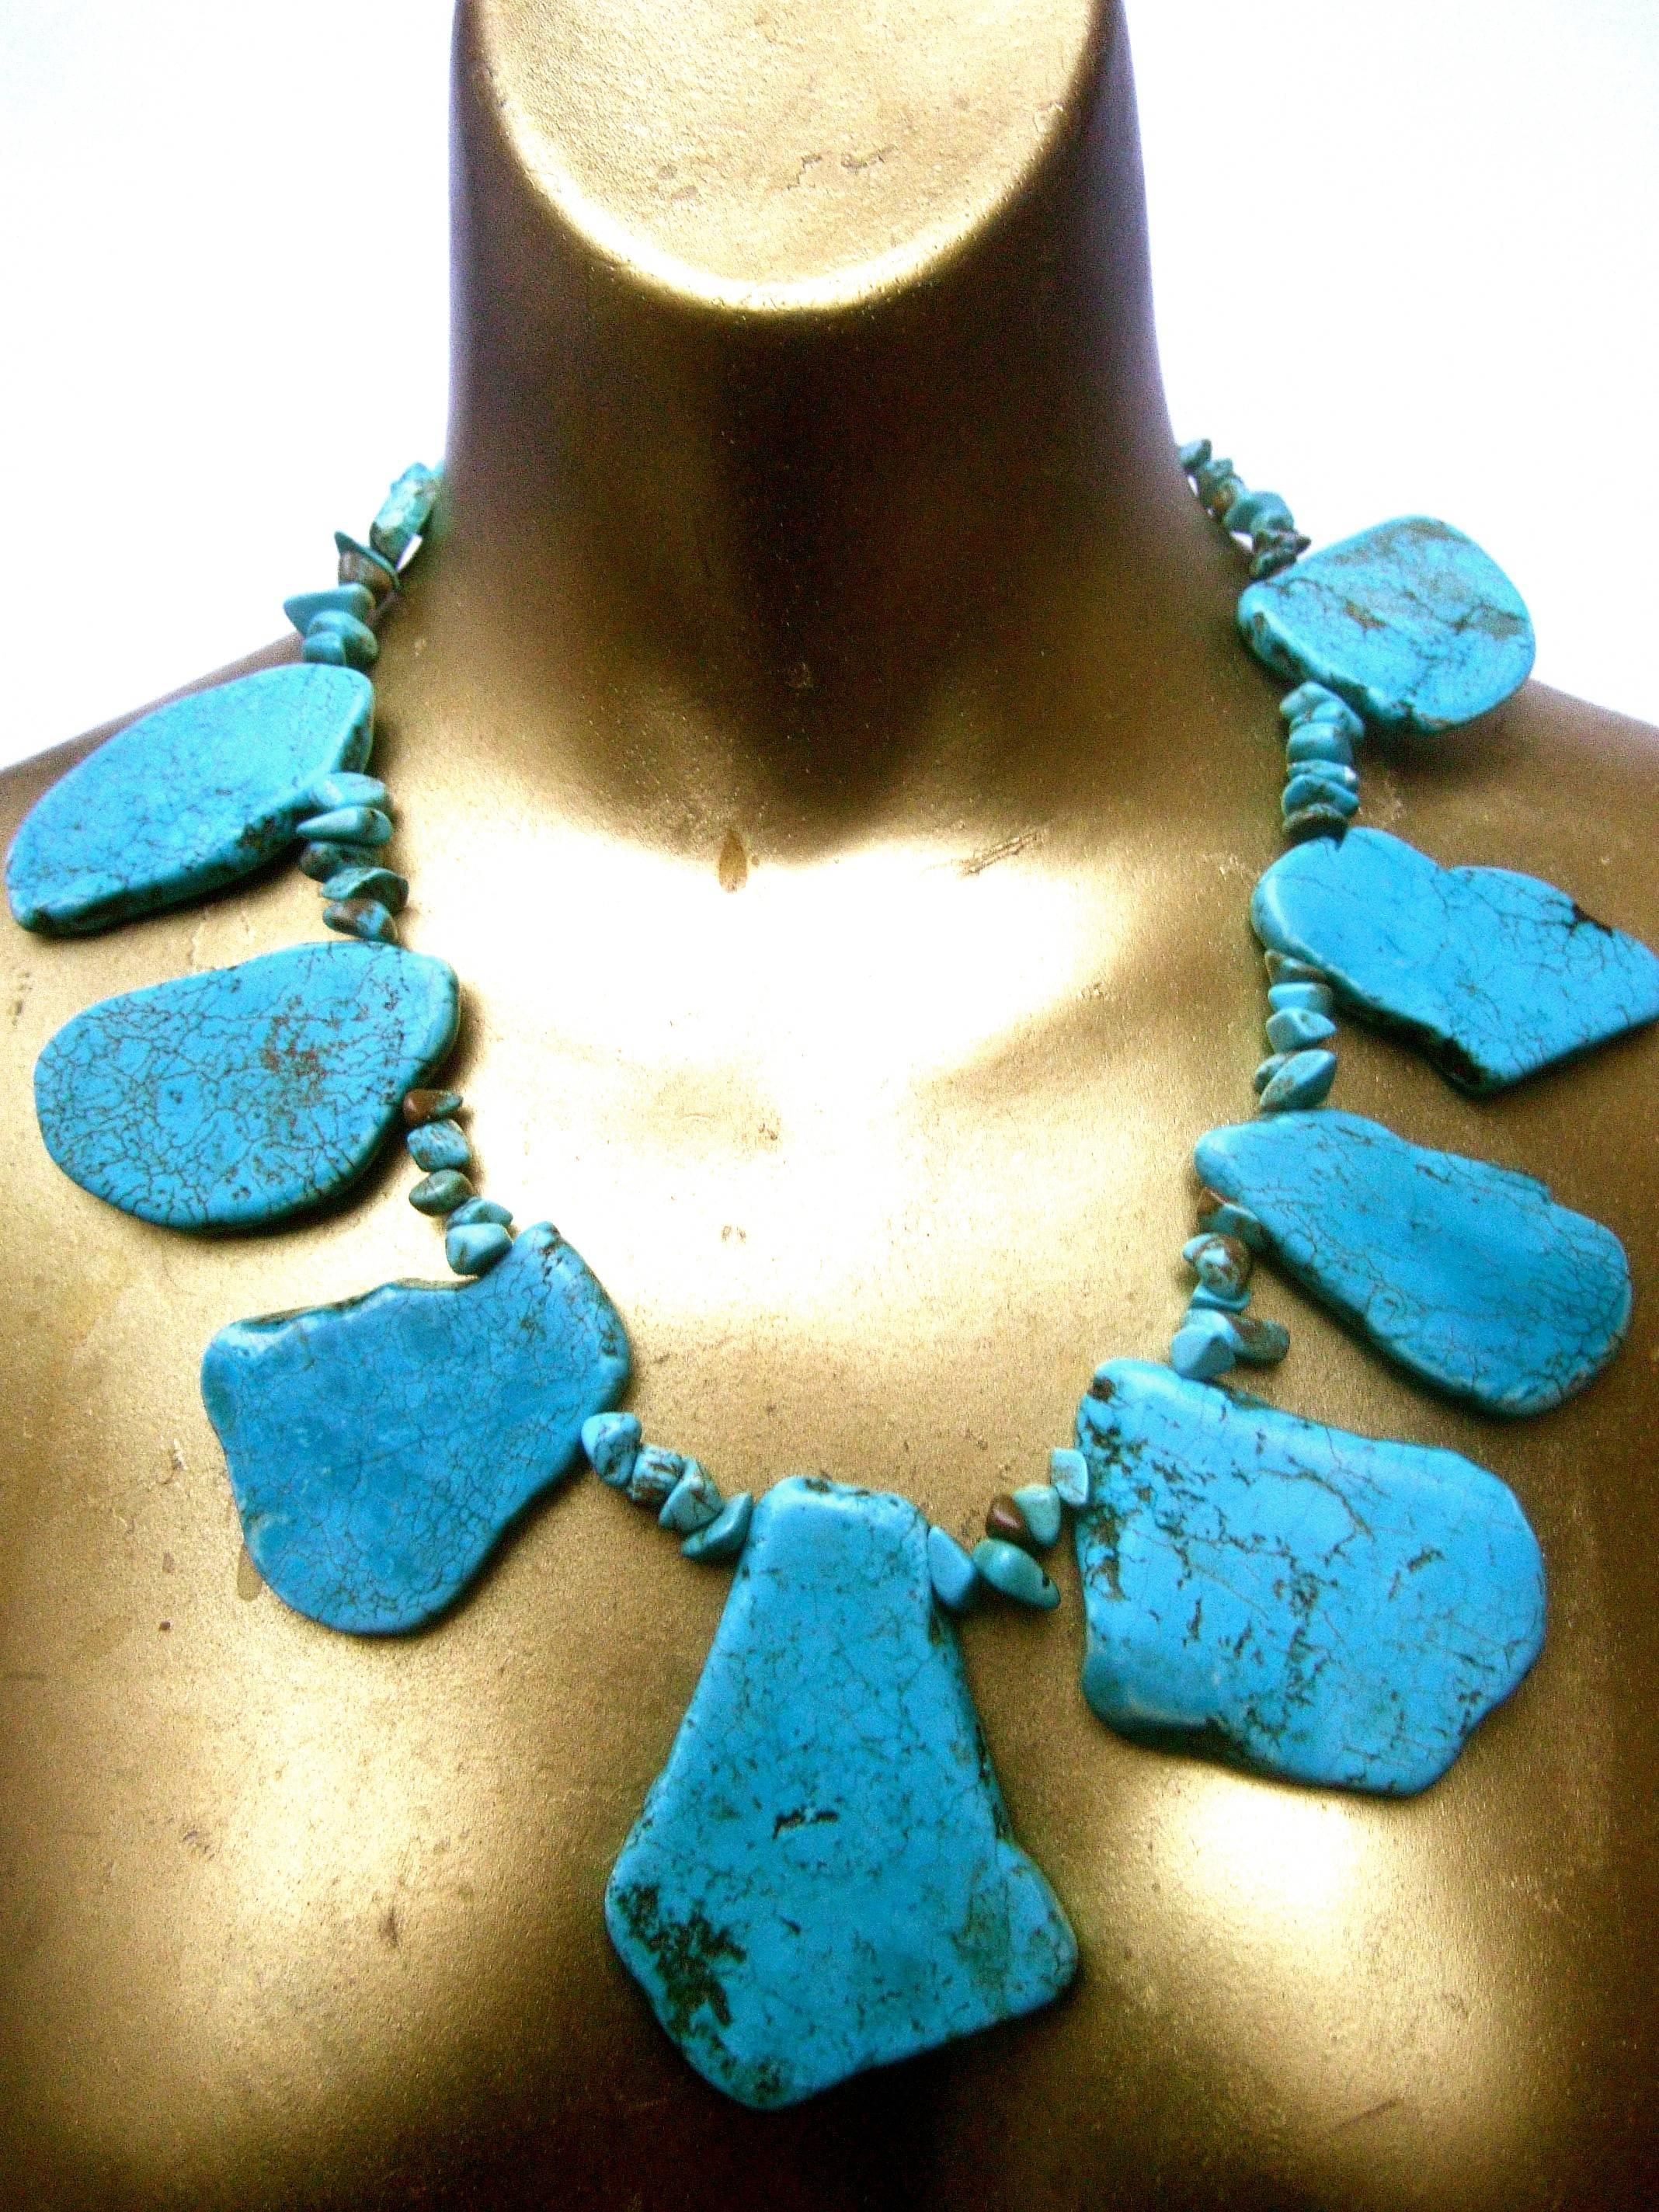 Artisan stone turquoise color howlite statement necklace c 1990s
The massive necklace is designed with a collection of organic
sliced smooth dyed turquoise color tiles

The large scale stones are suspended from a wire embellished
with small jagged